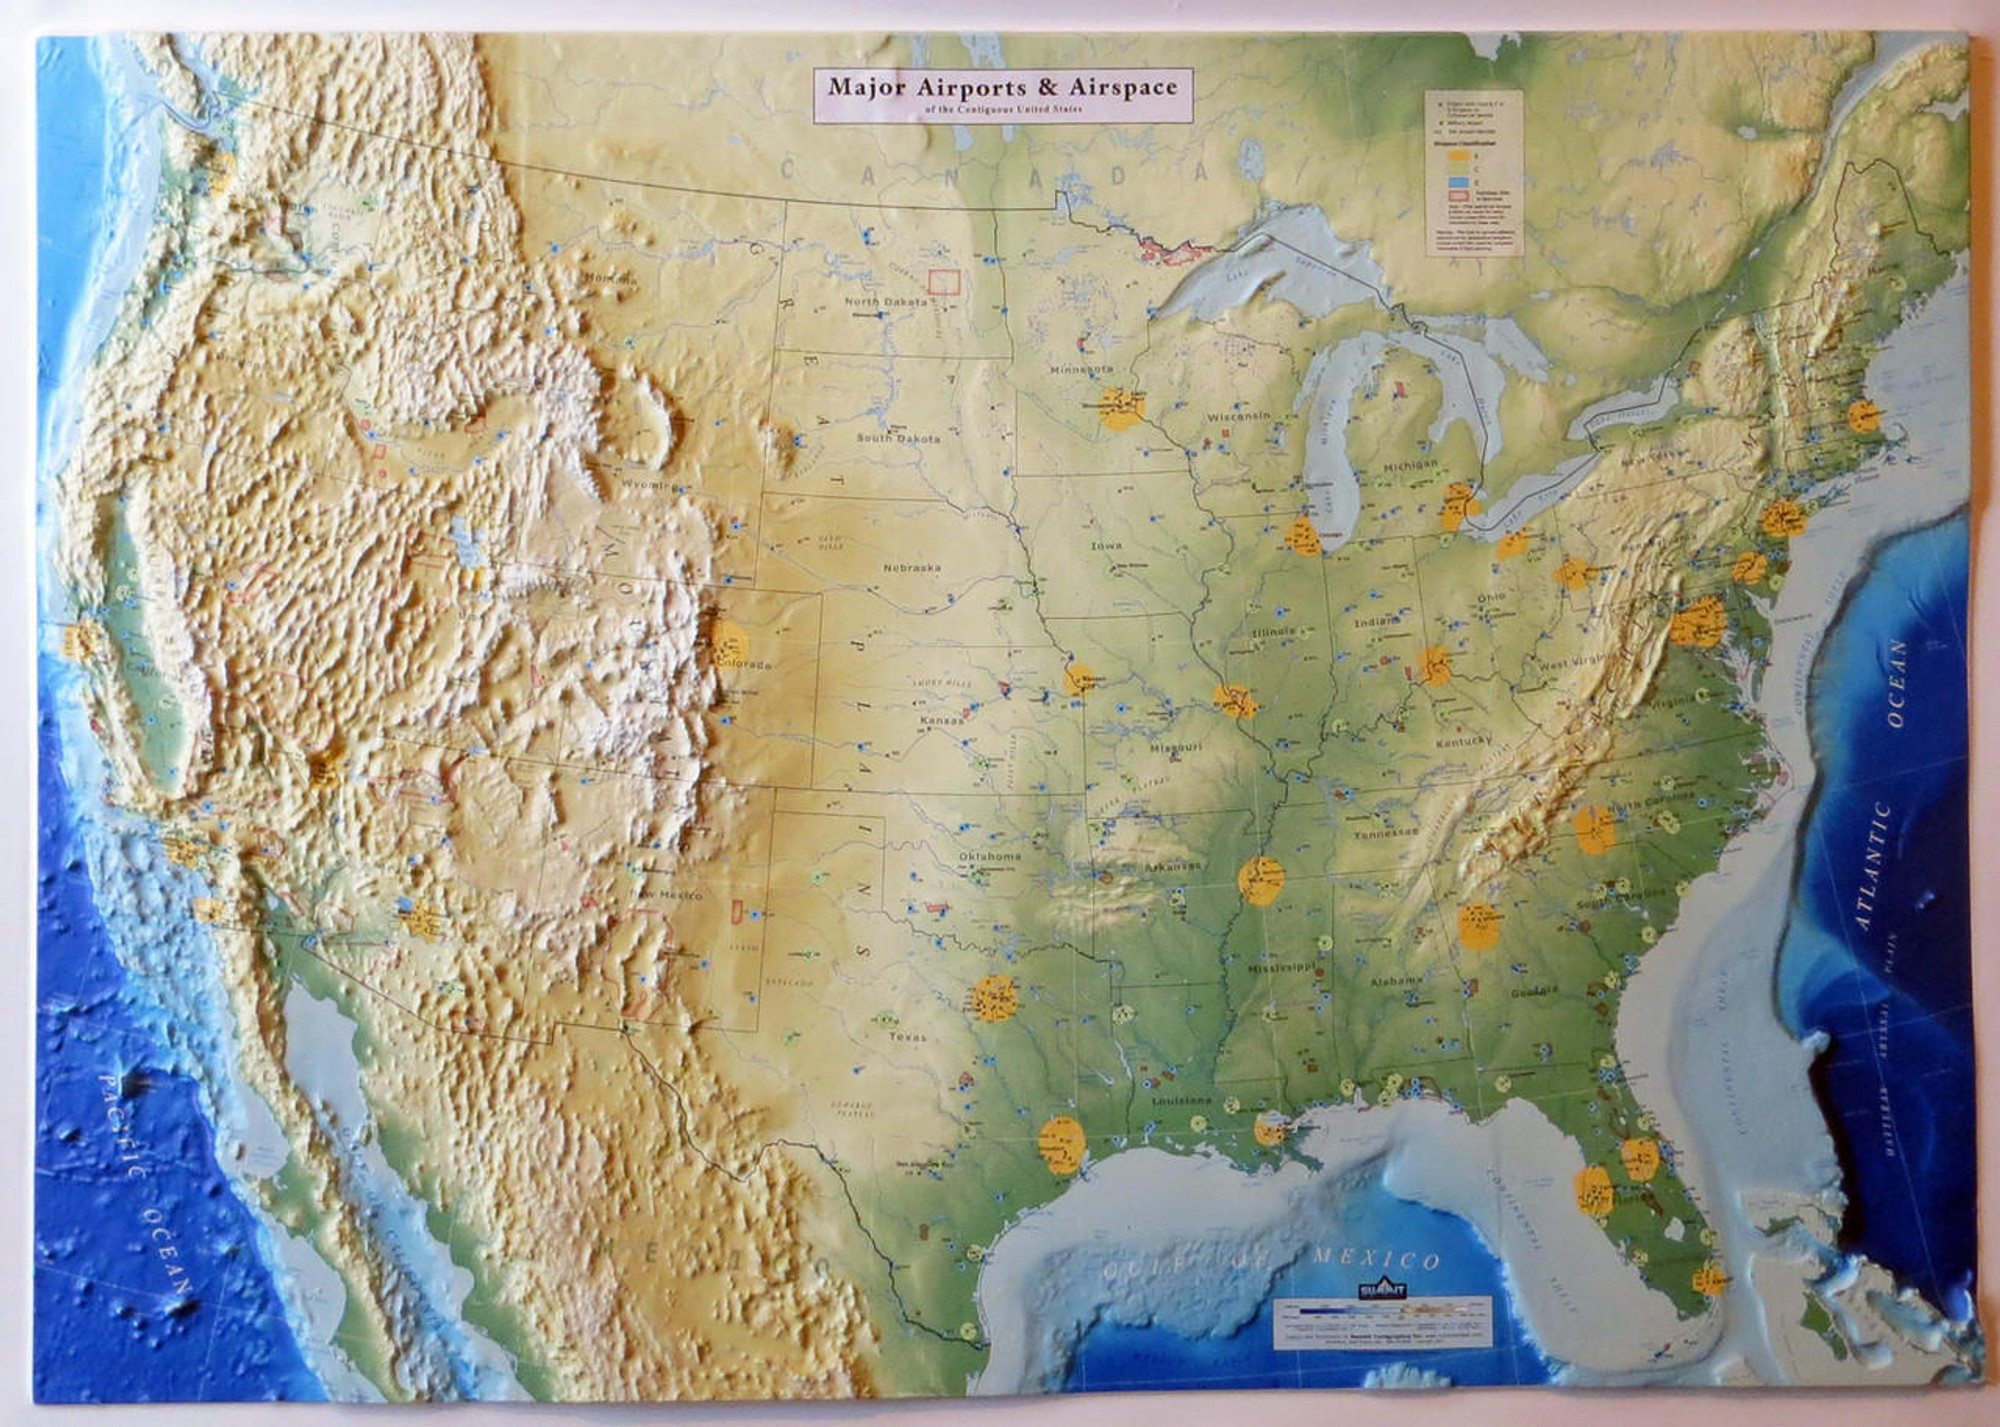 United States Airports & Airspace Raised Relief Map, image 1, World Maps Online